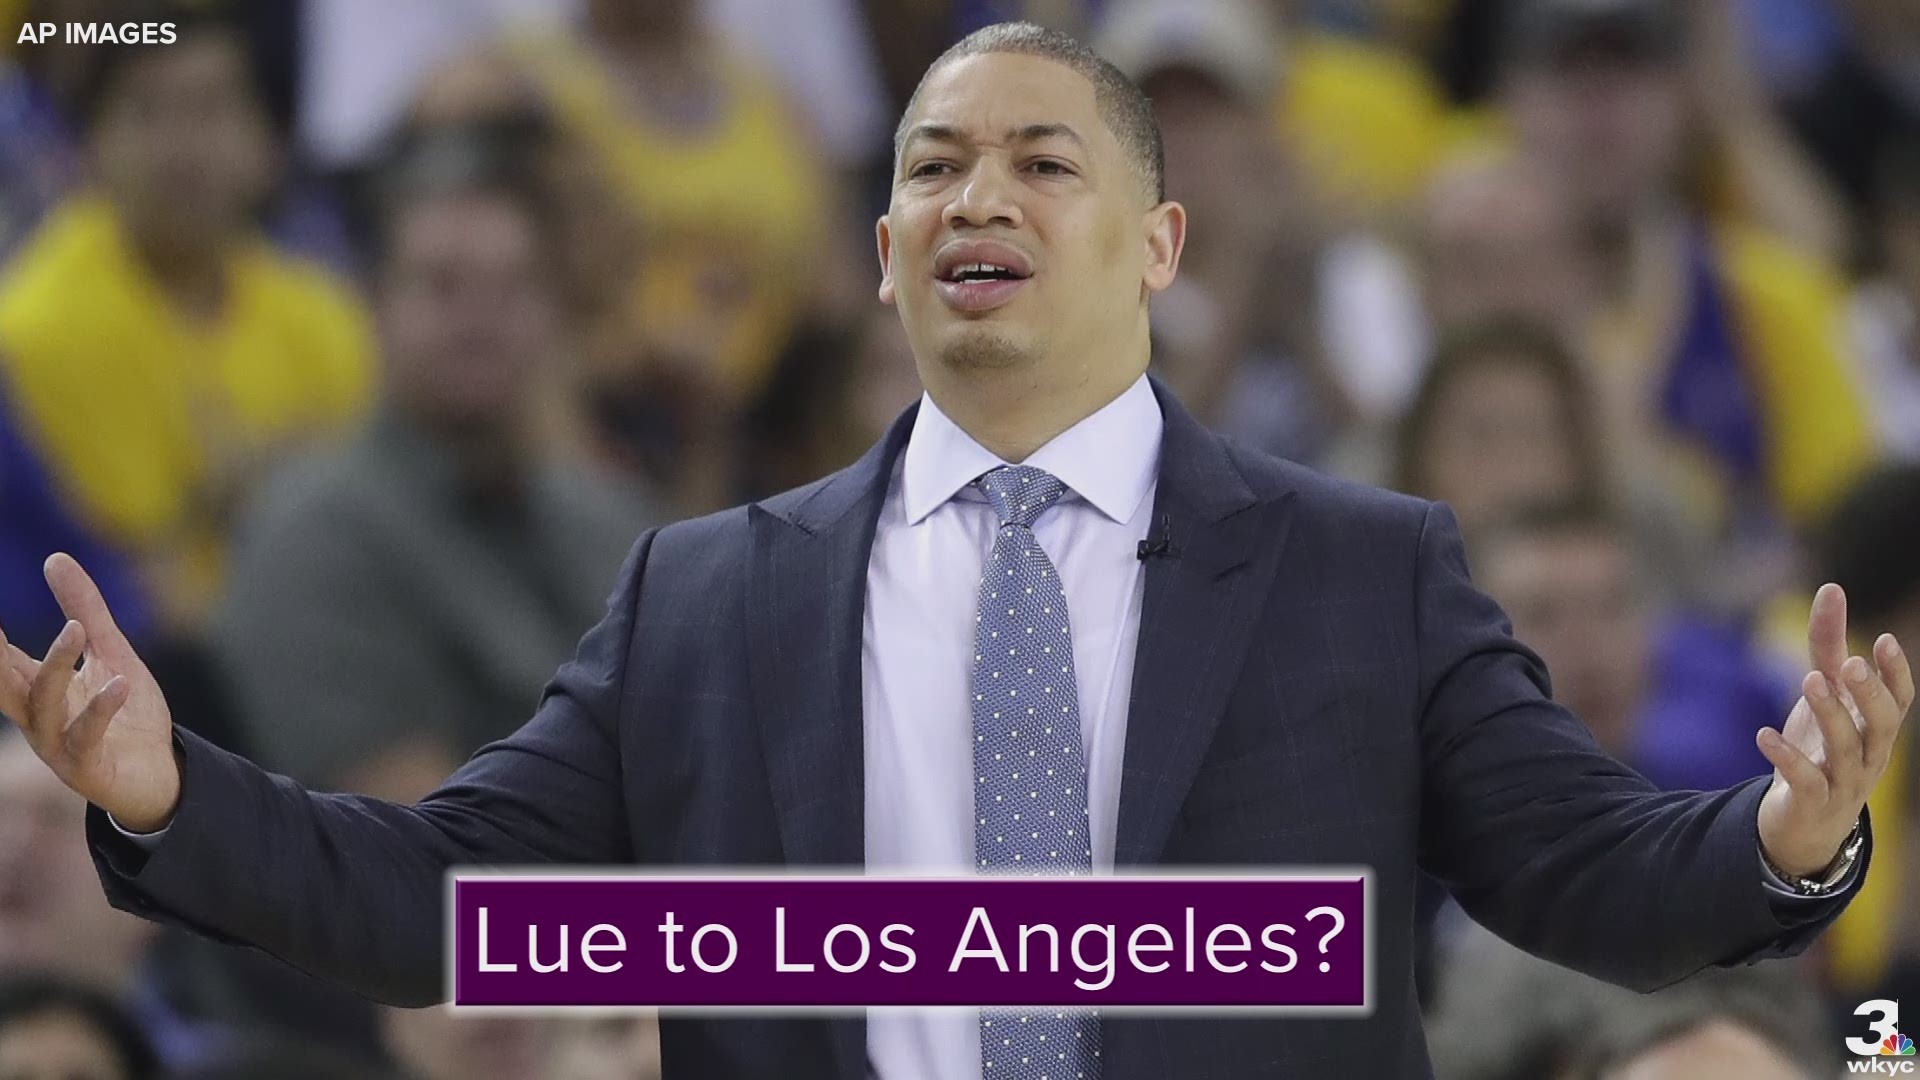 Reportedly, former Cleveland Cavaliers coach Tyronn Lue reached out to Luke Walton about rumors of him being a replacement as Los Angeles Lakers coach.